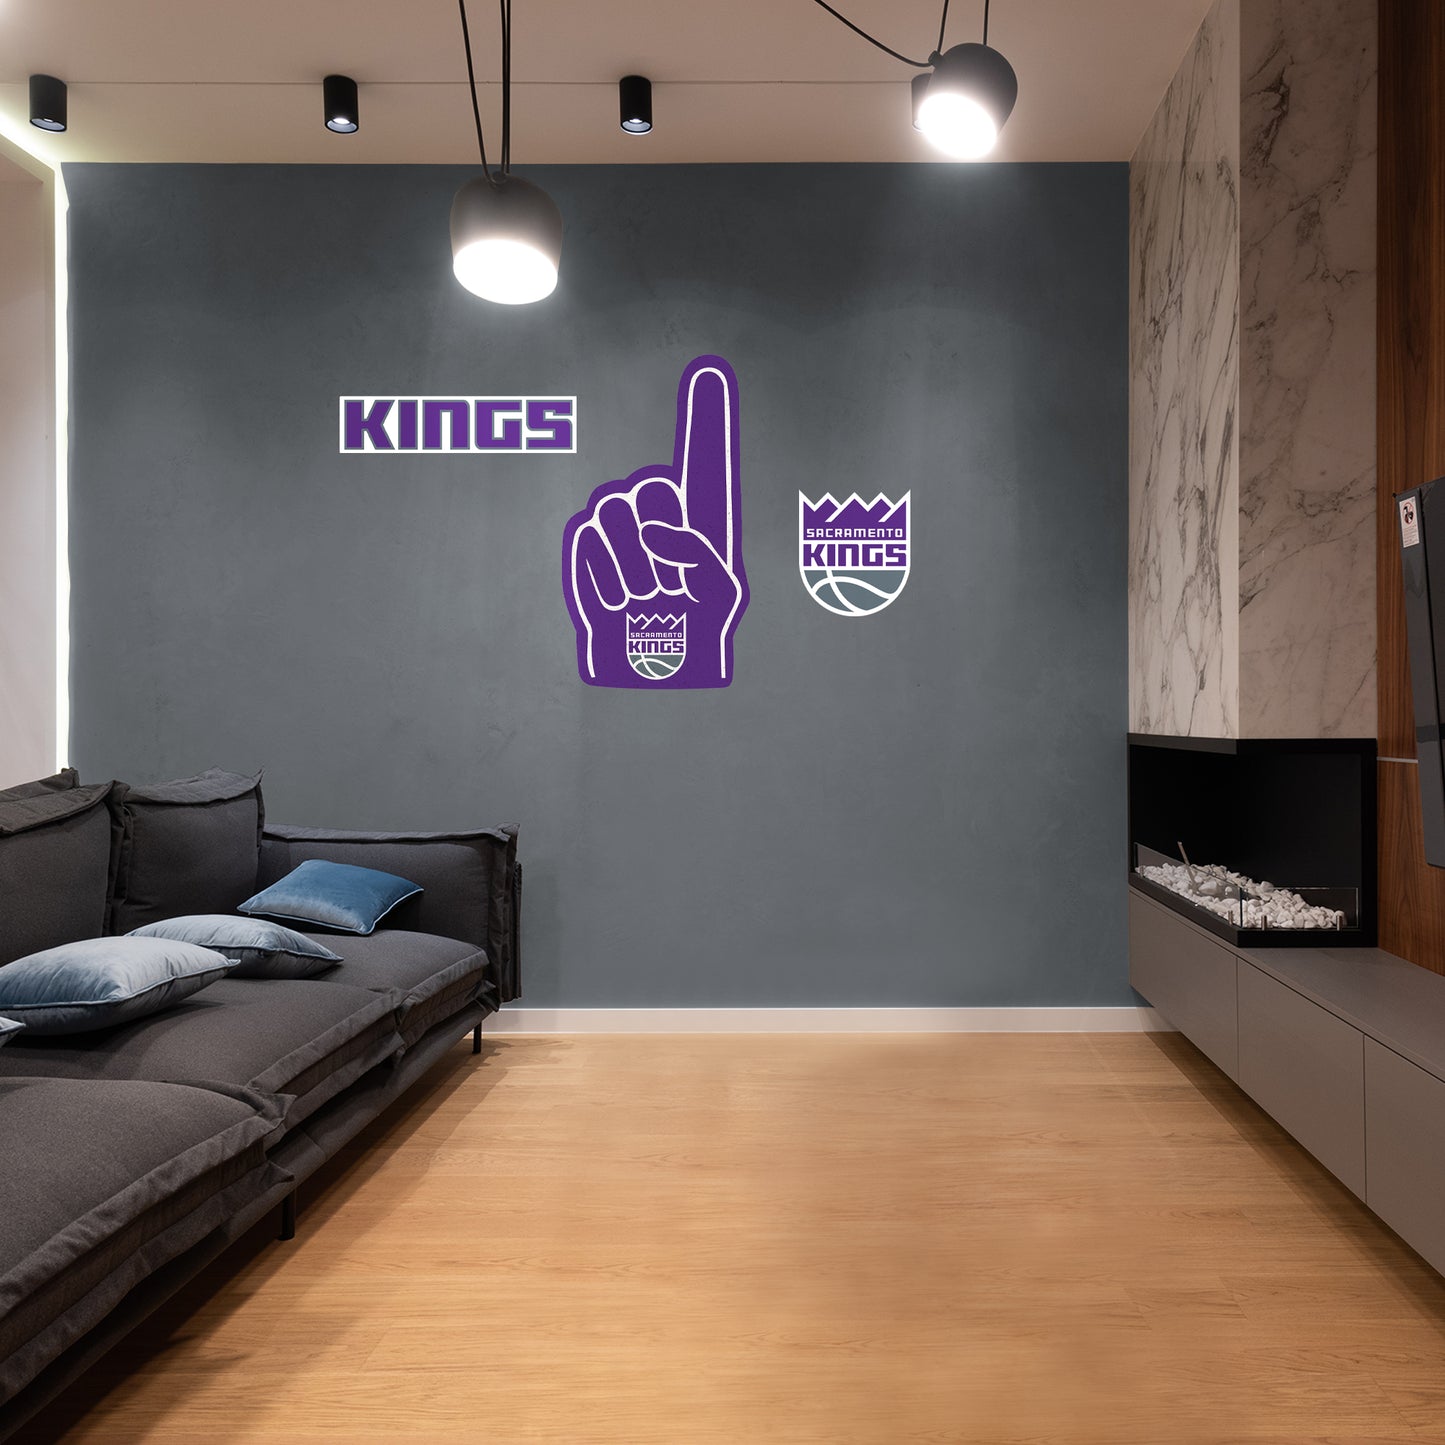 Sacramento Kings: Foam Finger - Officially Licensed NBA Removable Adhesive Decal